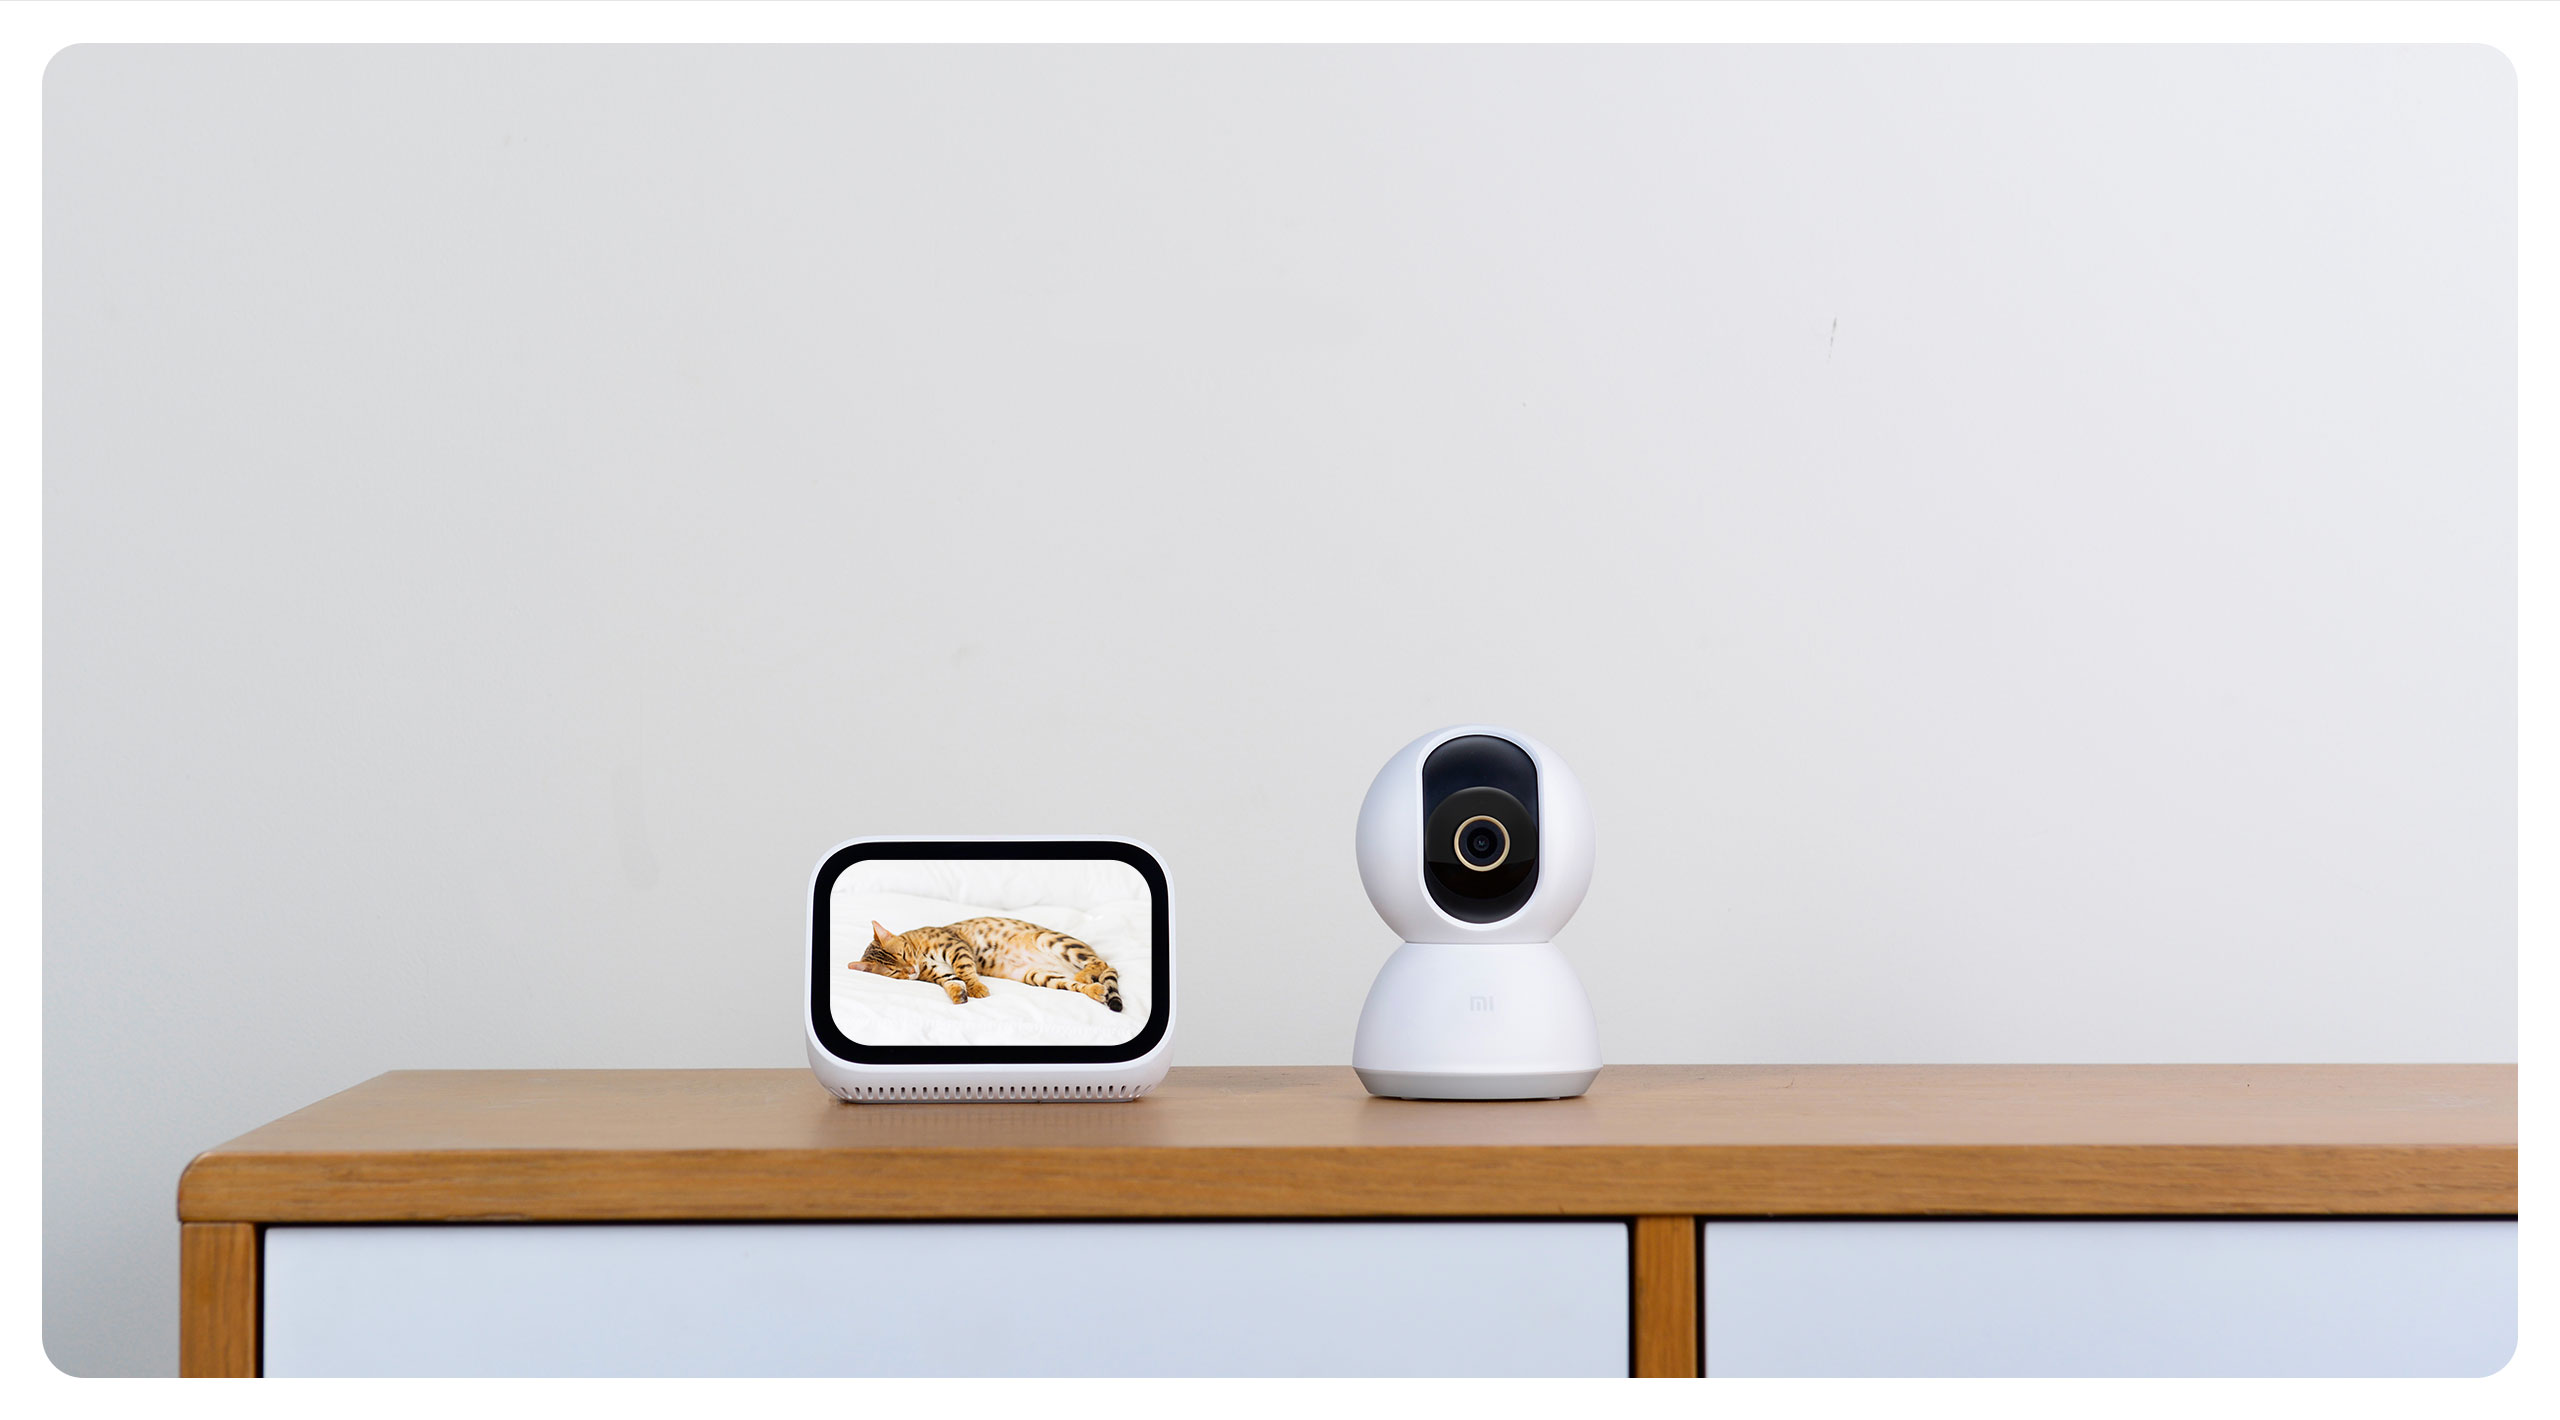 Xiaomi-360-Degree-Home-Security-Camera-2K-Product-image-7